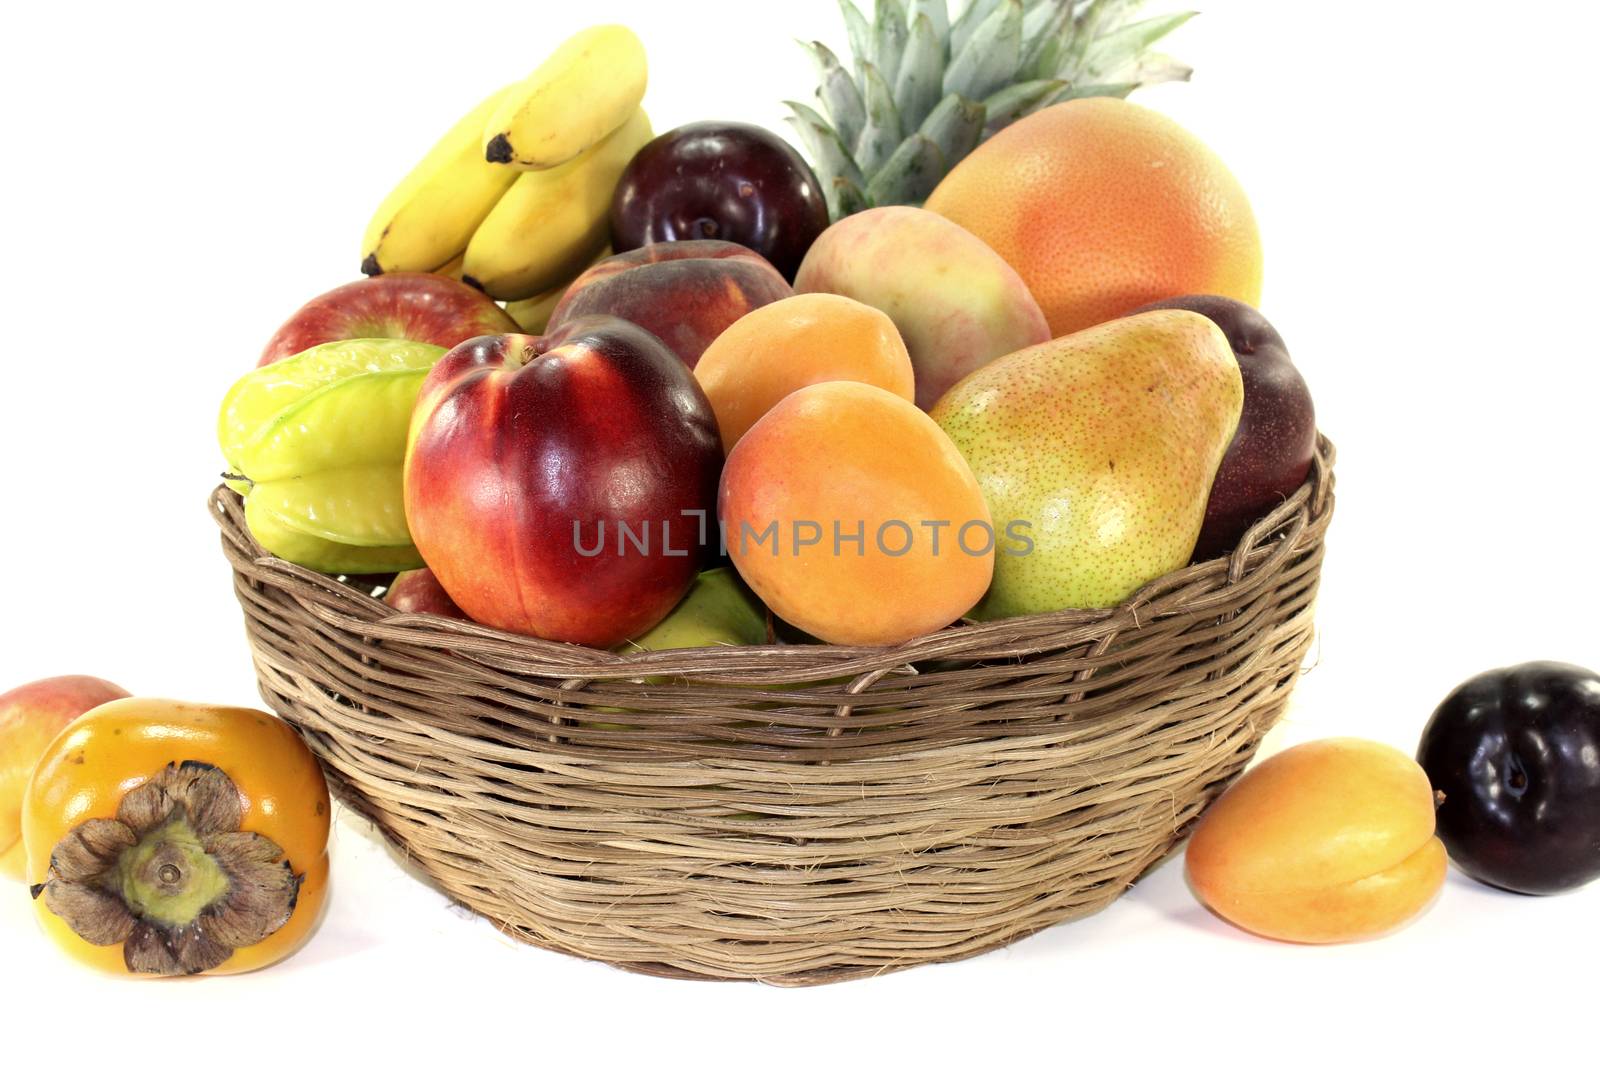 Fruit basket with various colorful fruits by discovery